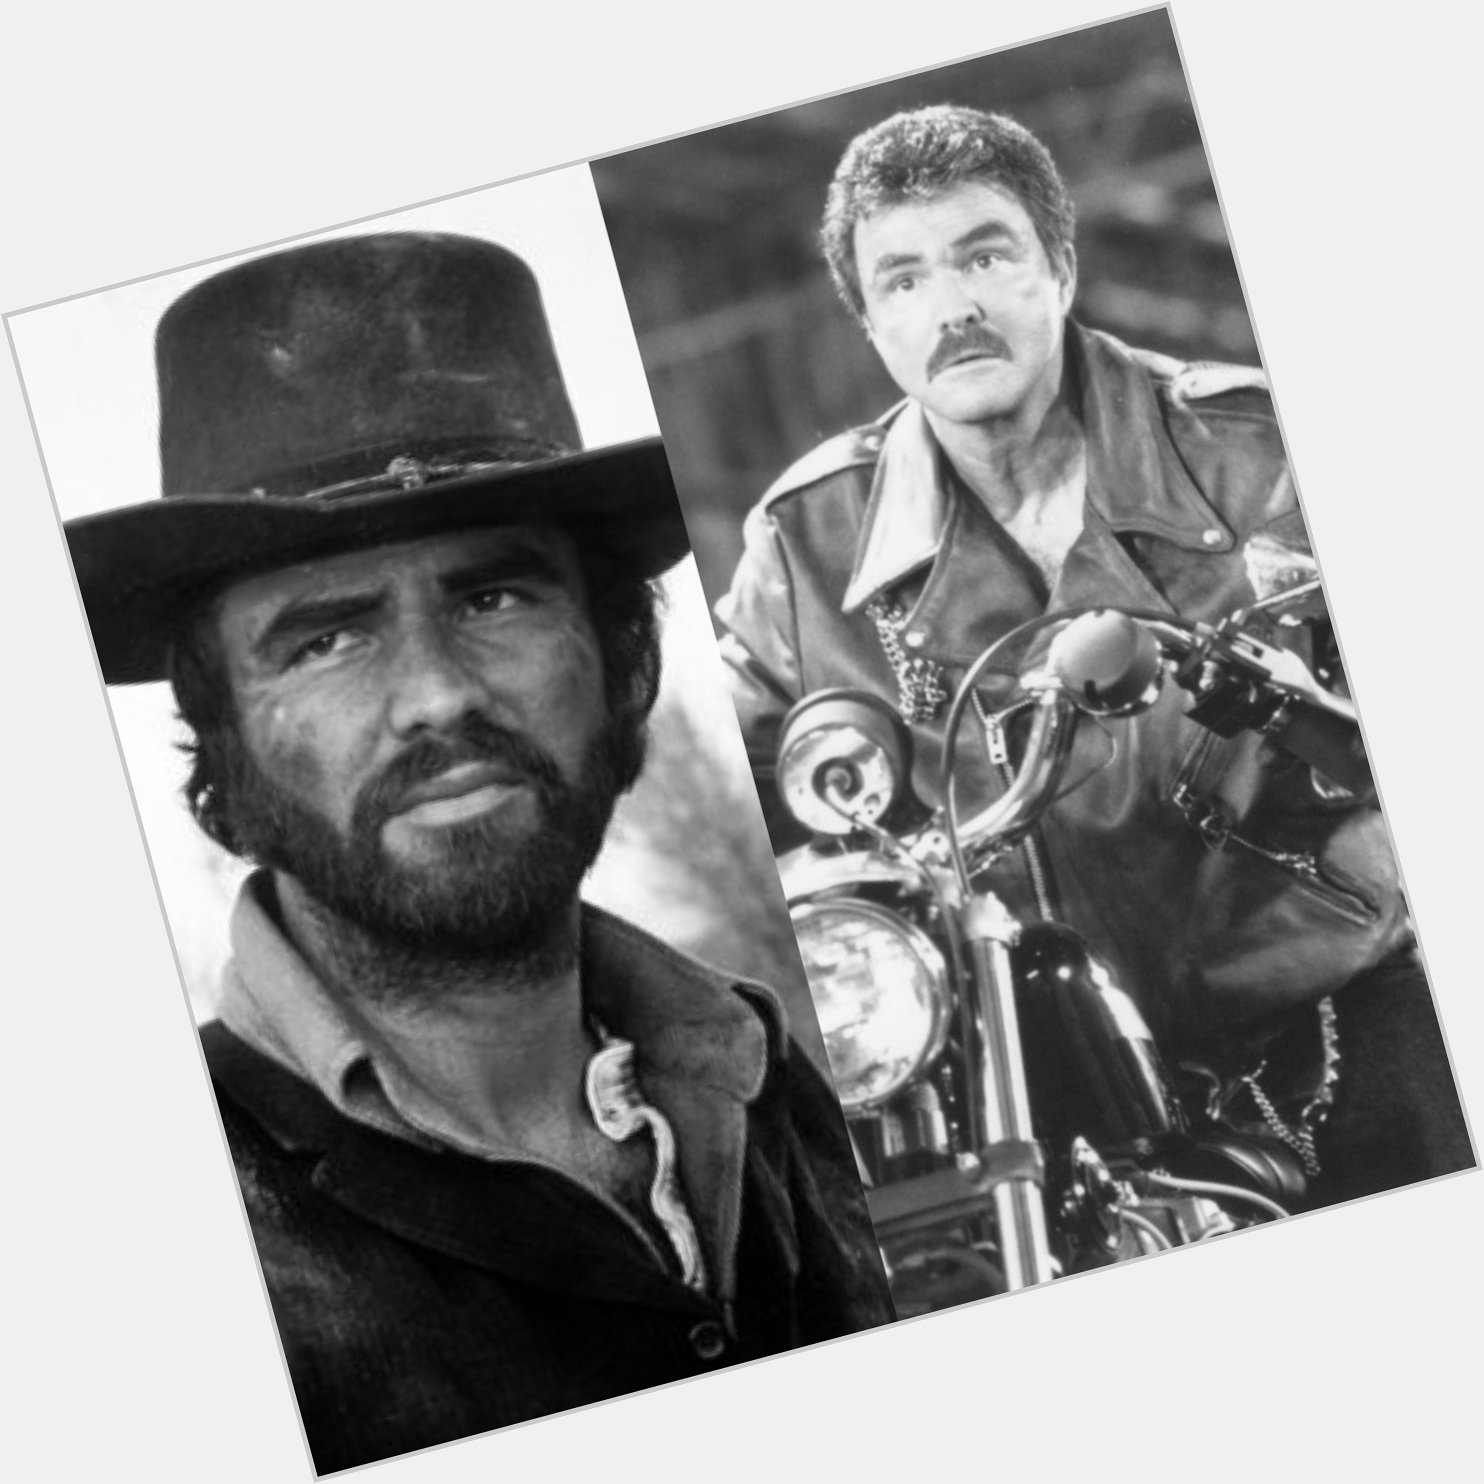 Happy 80th Birthday Burt Reynolds! From TV westerns to rugged action figures, you are a true 